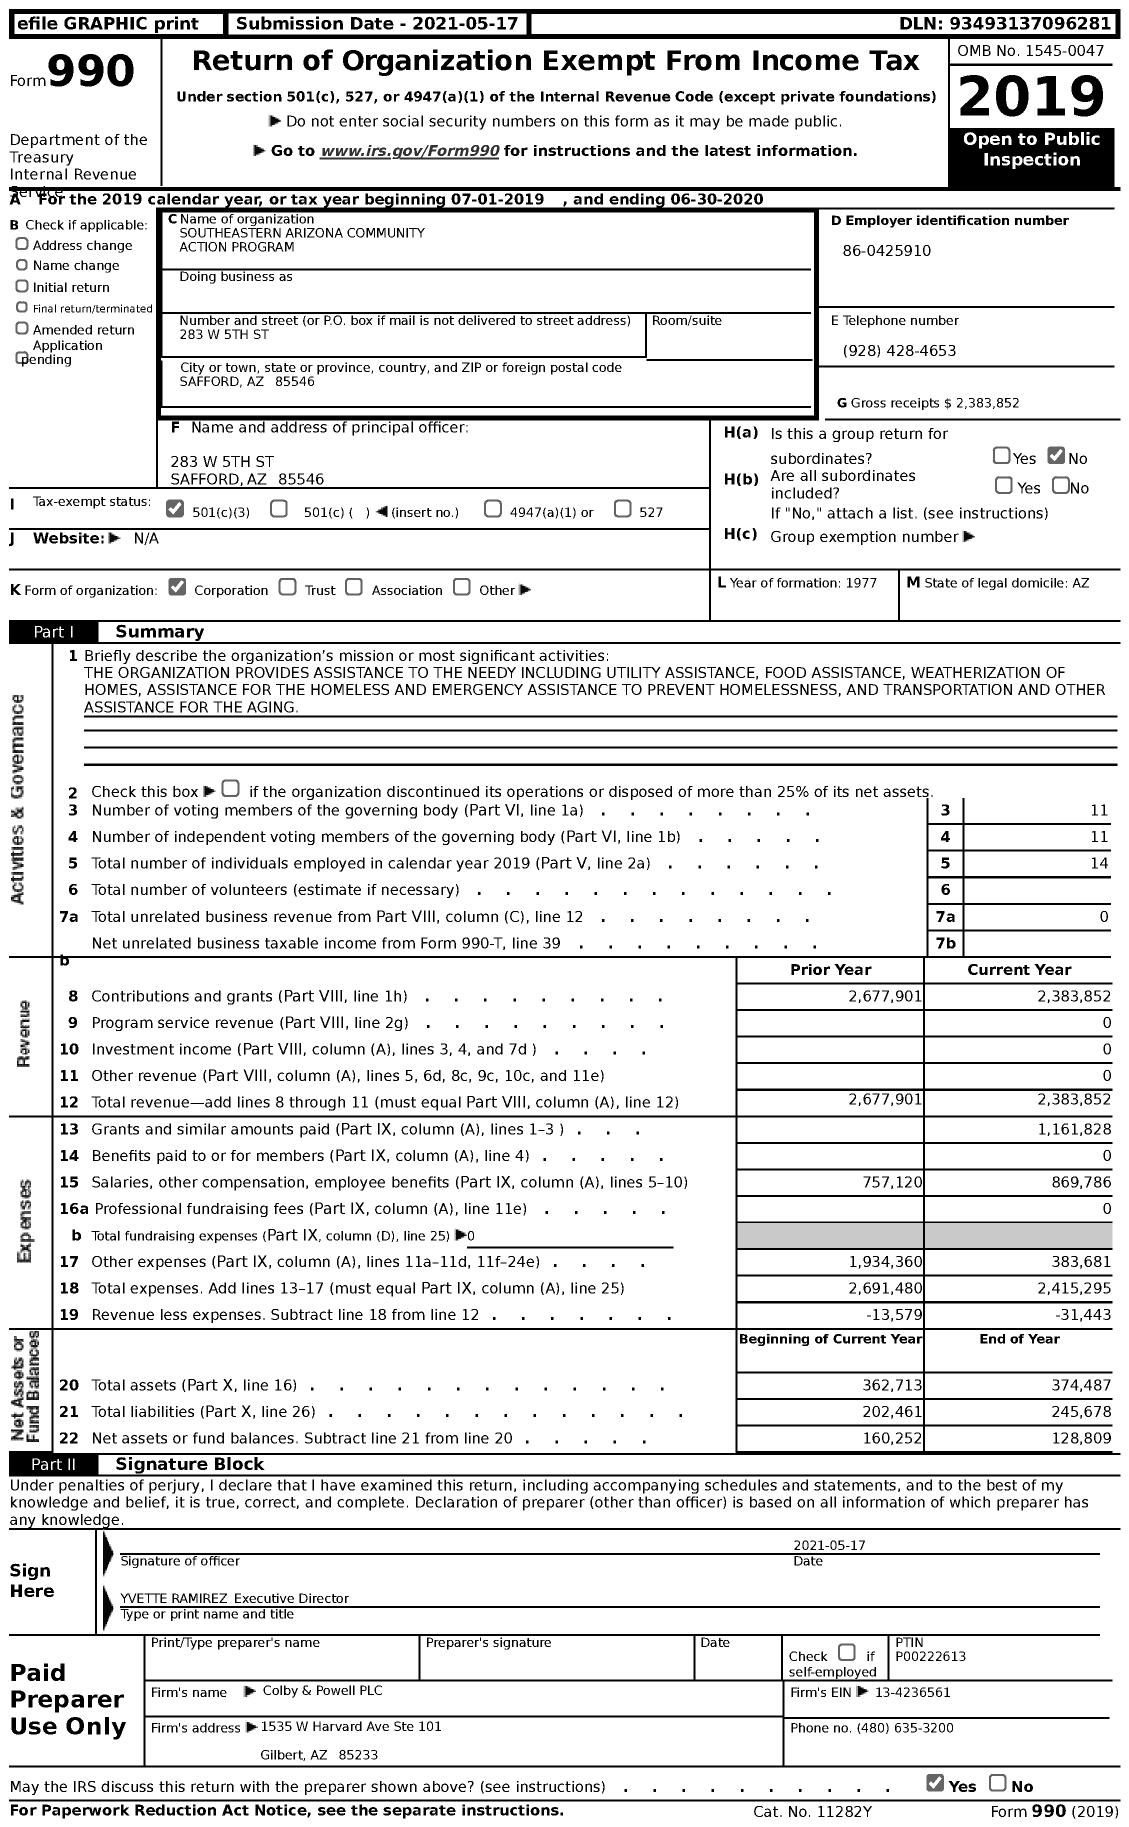 Image of first page of 2019 Form 990 for SouthEastern Arizona Community Action Program (SEACAP)